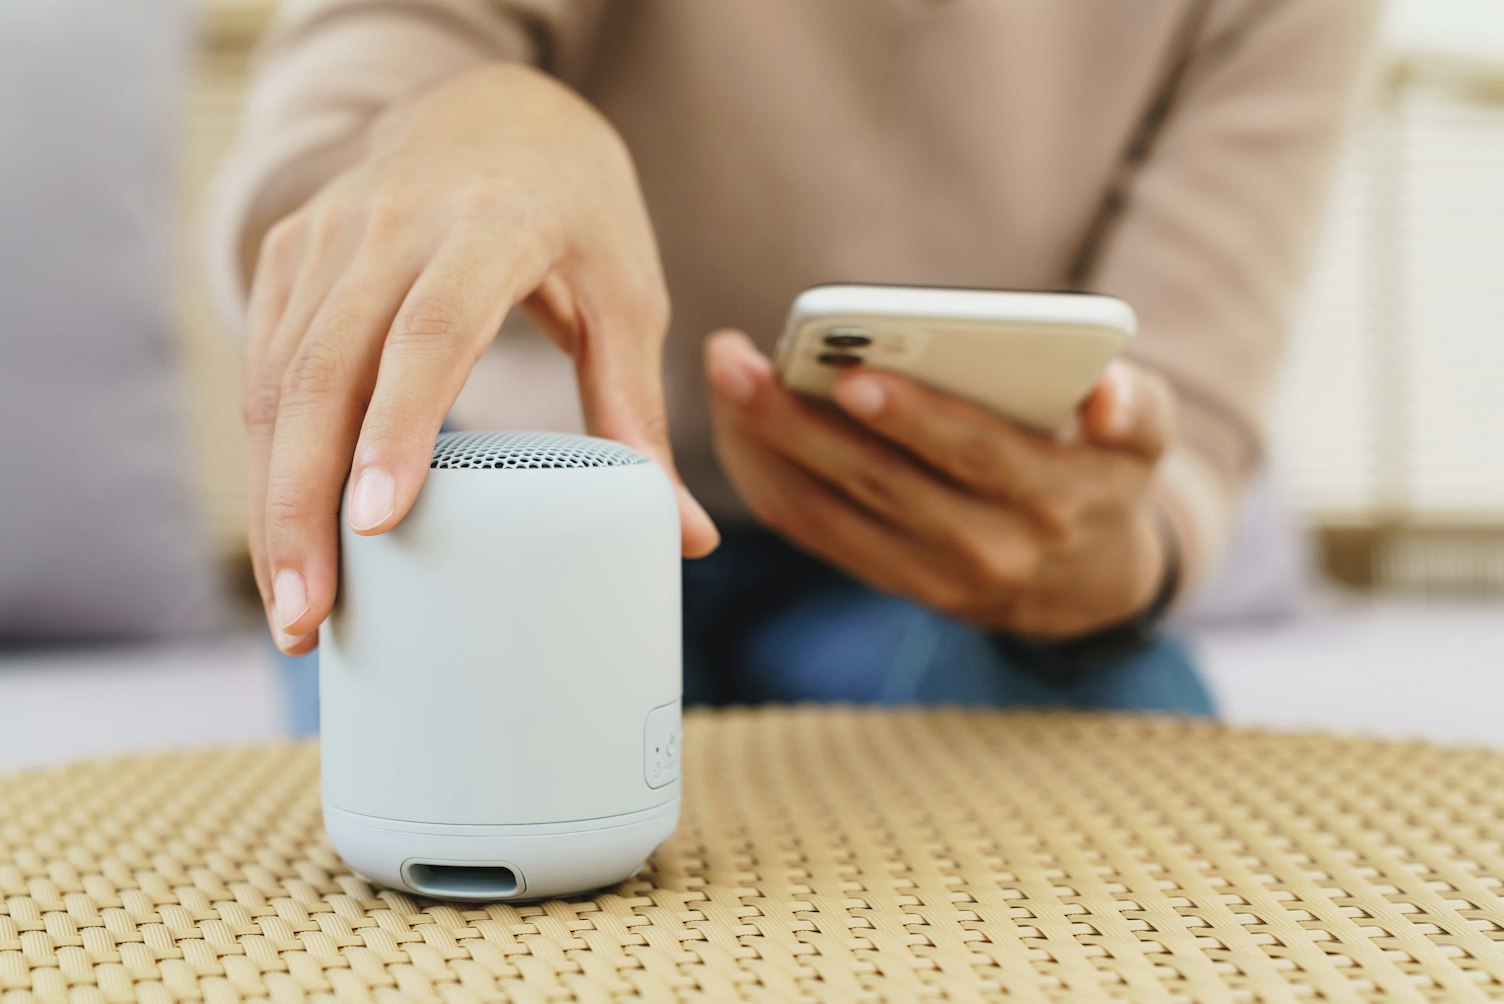 Connection between a Smart Phone and a Bluetooth Speaker